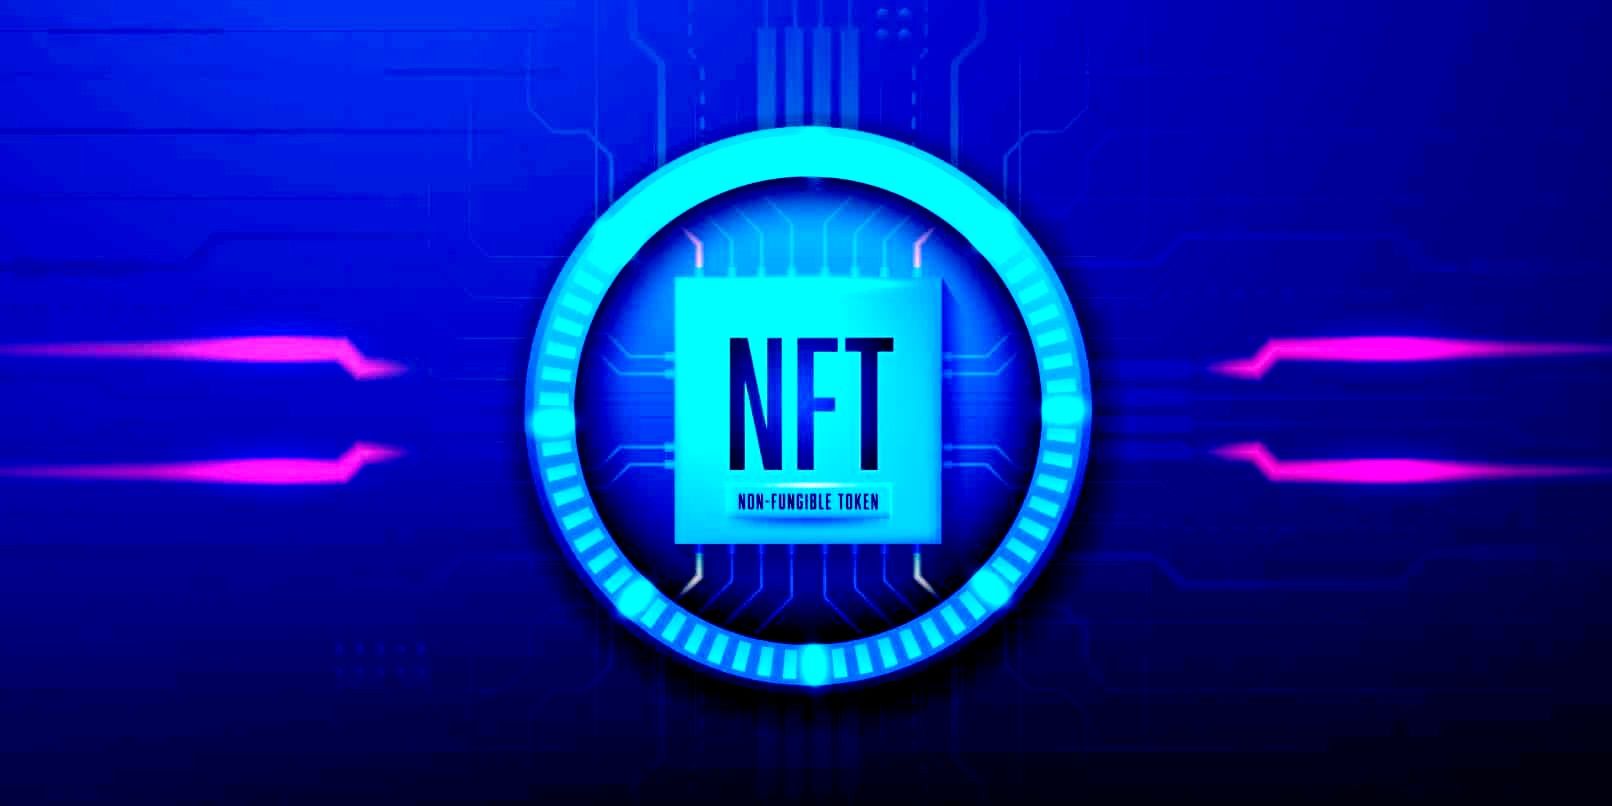 NFT letters in vivid blue circle on dark blue background with electrical circuity inside